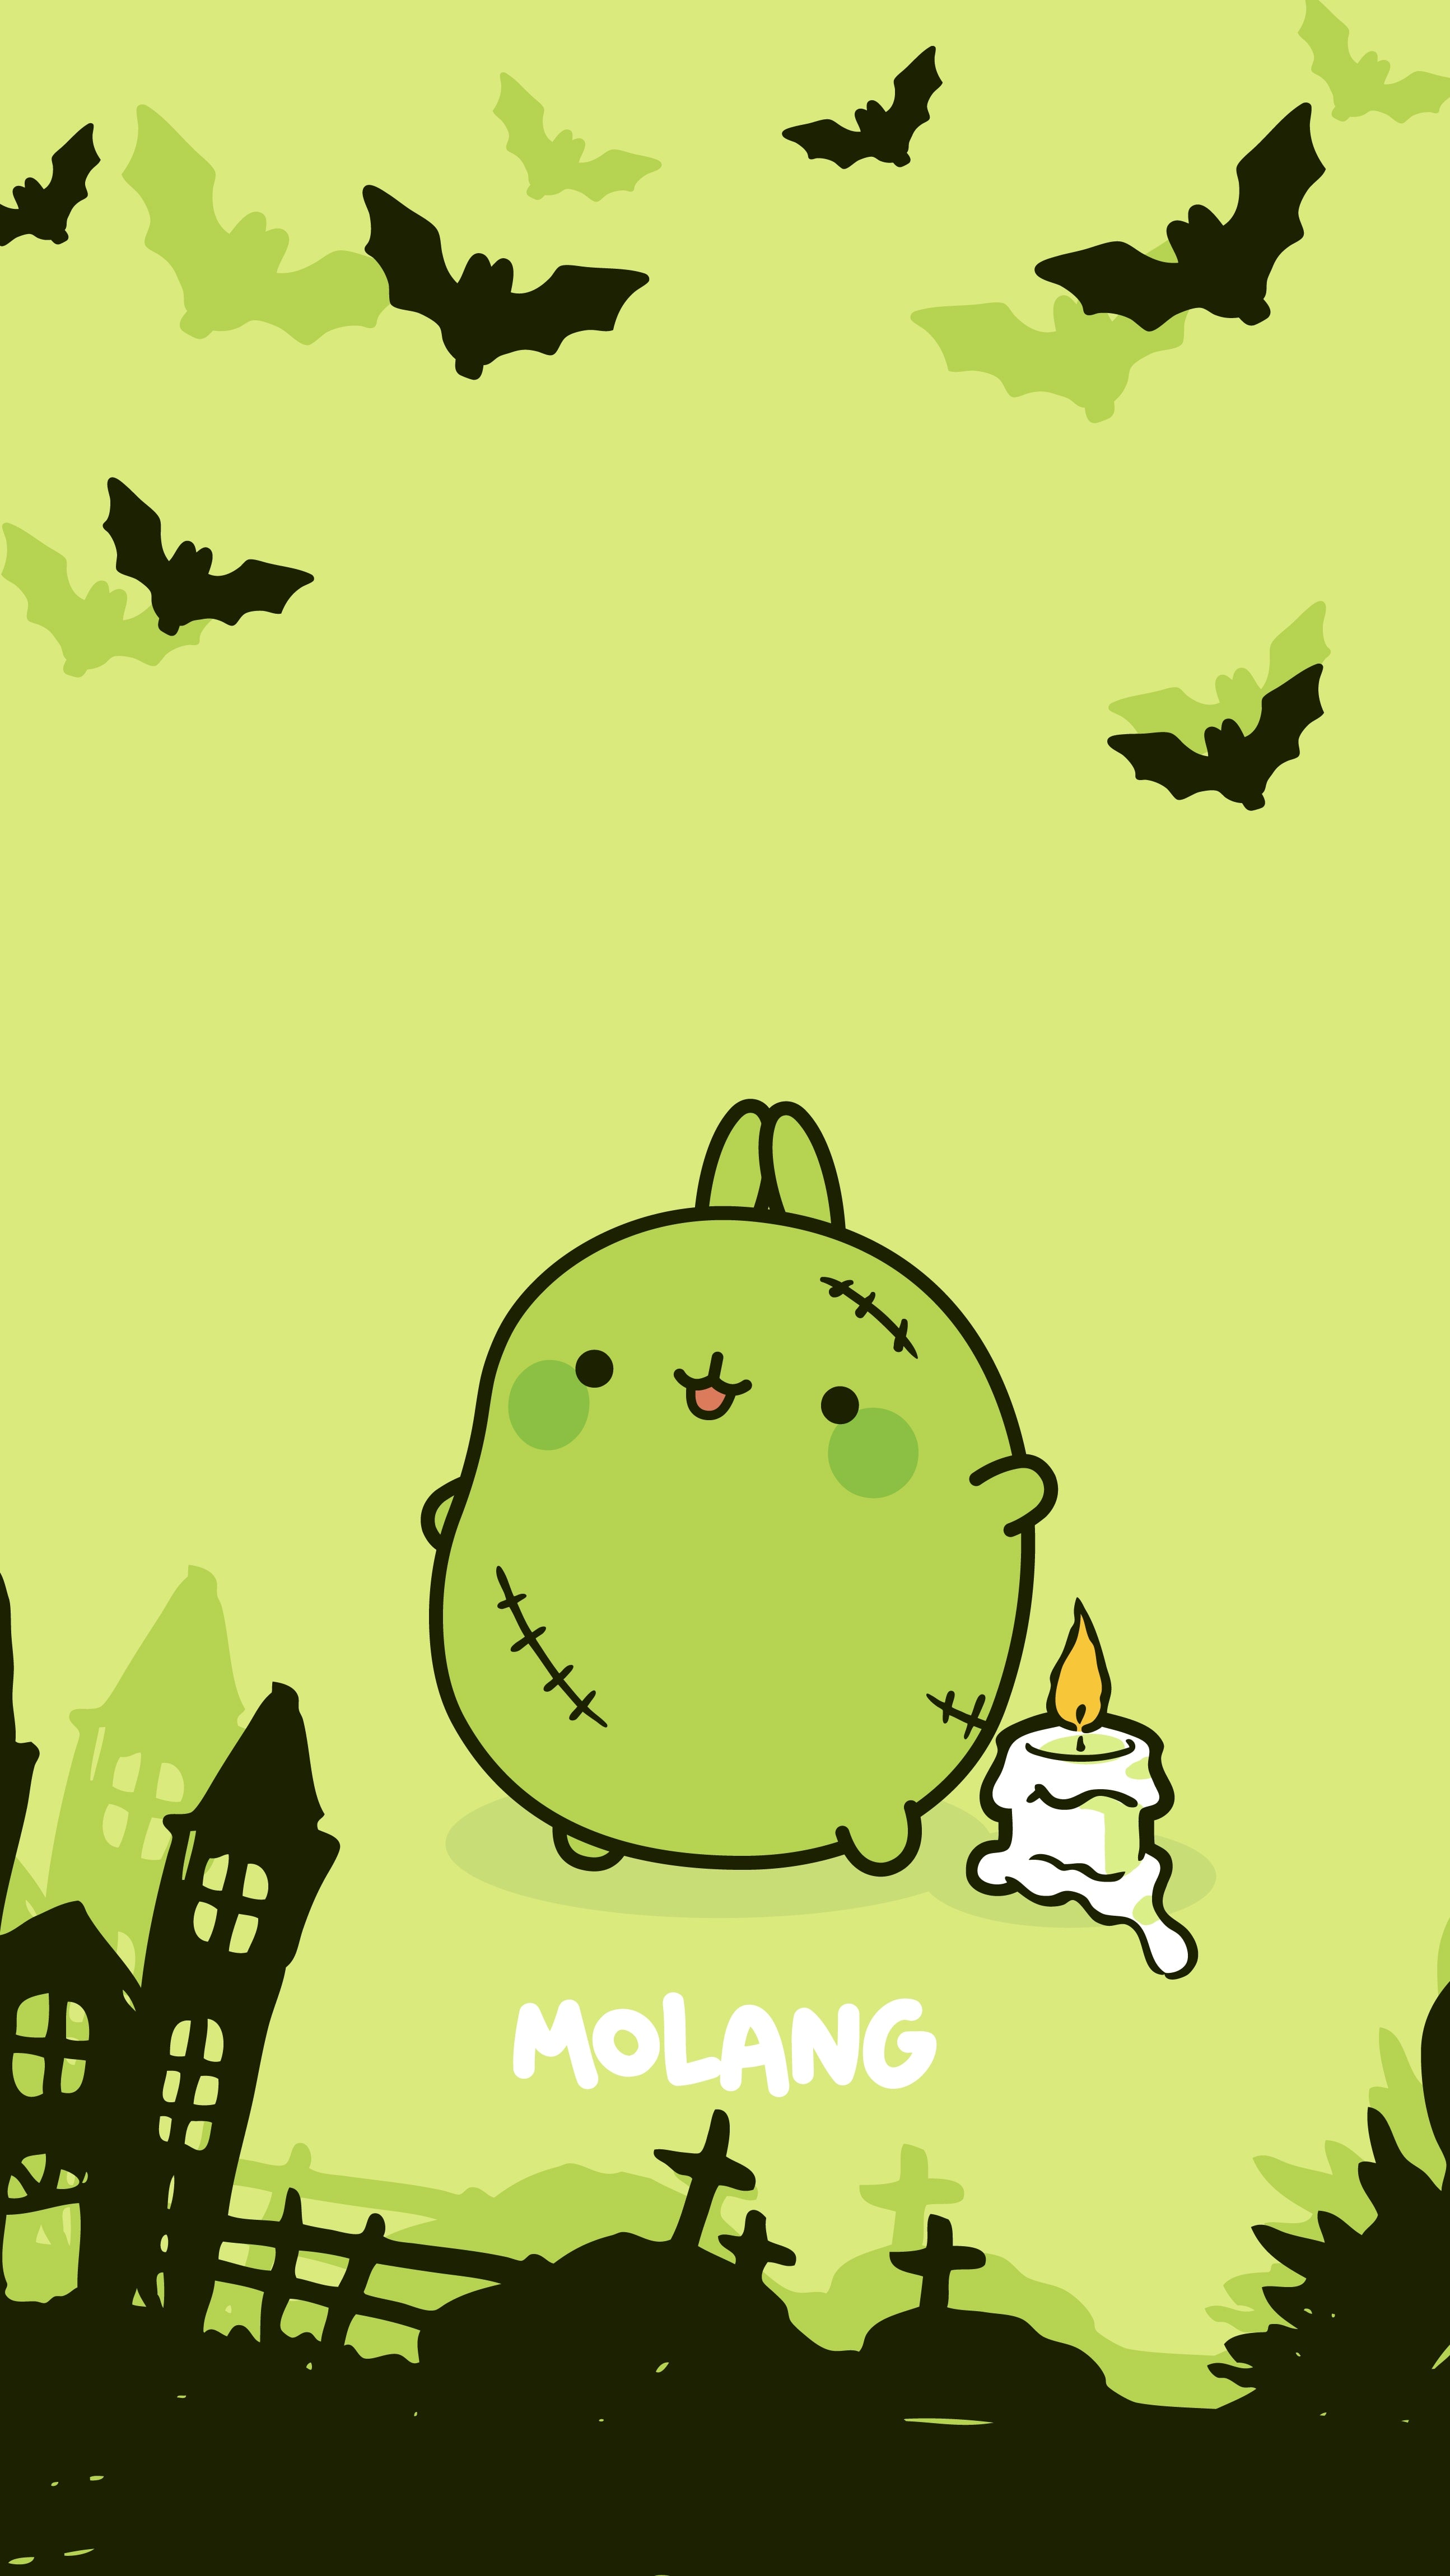 A cute Molang dressed as Frankenstein with a candle in his hand - Molang, Halloween